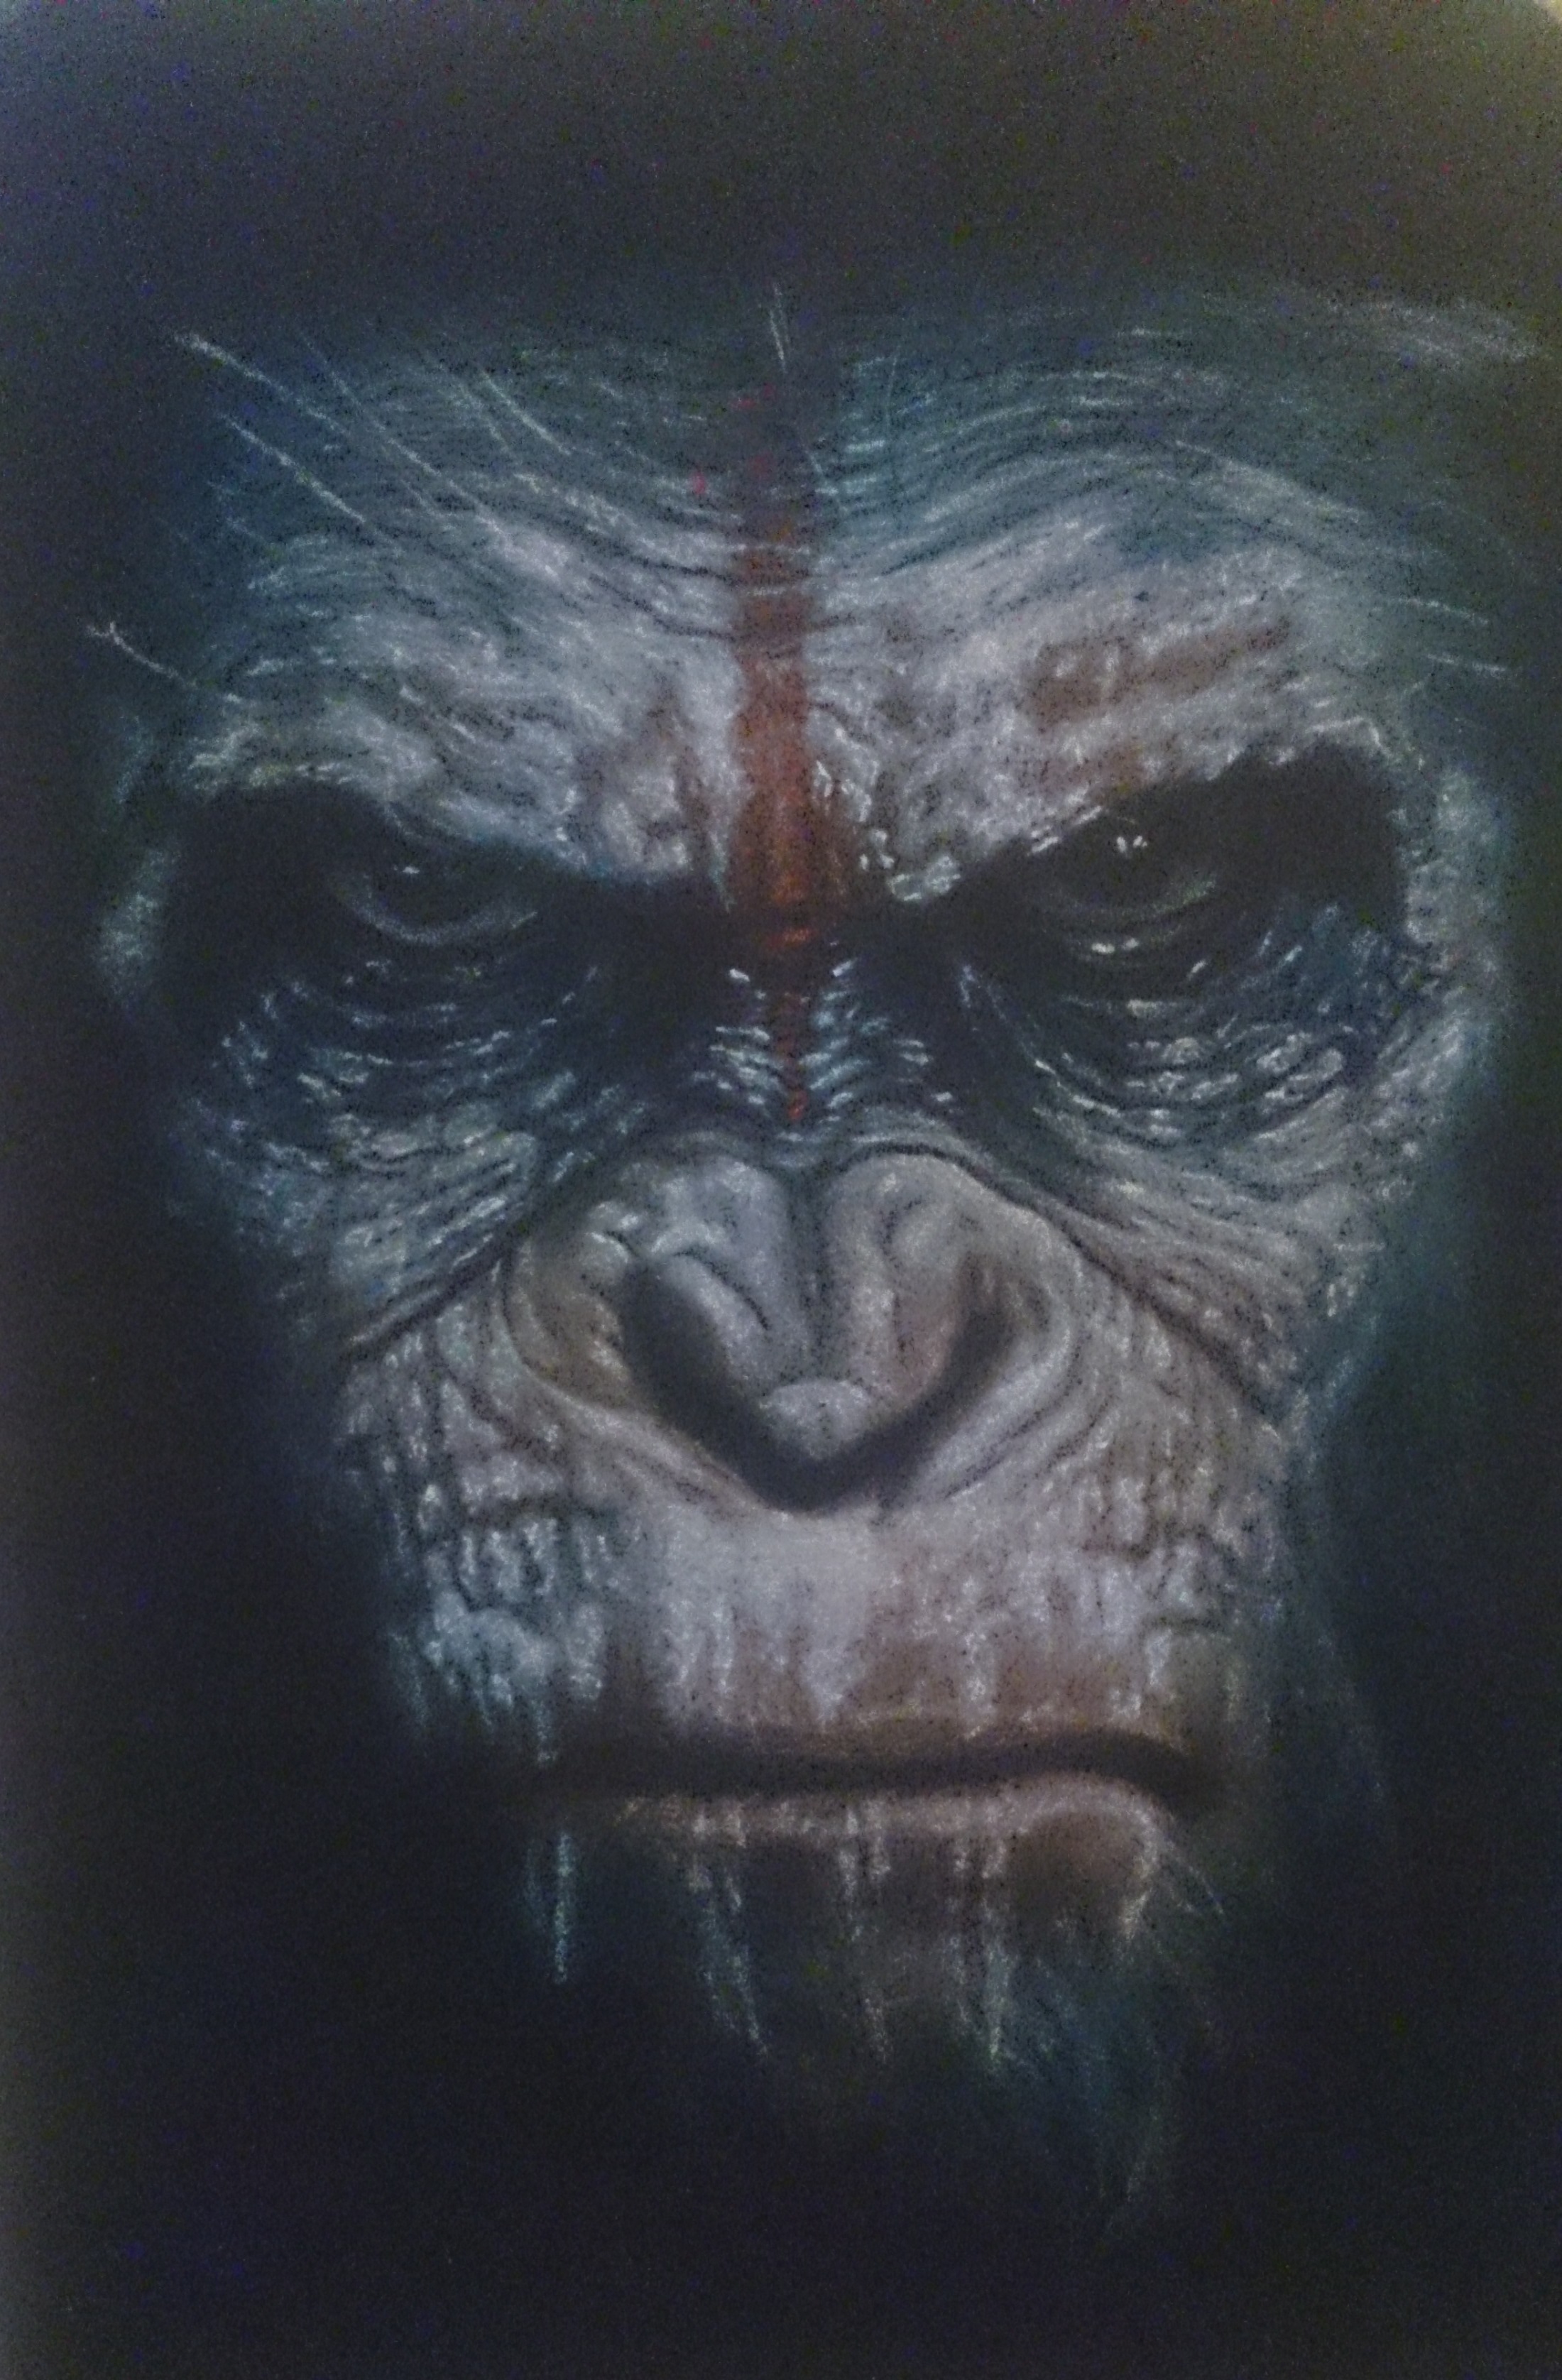 caesar_planet_of_the_apes_by_jonarton-d7